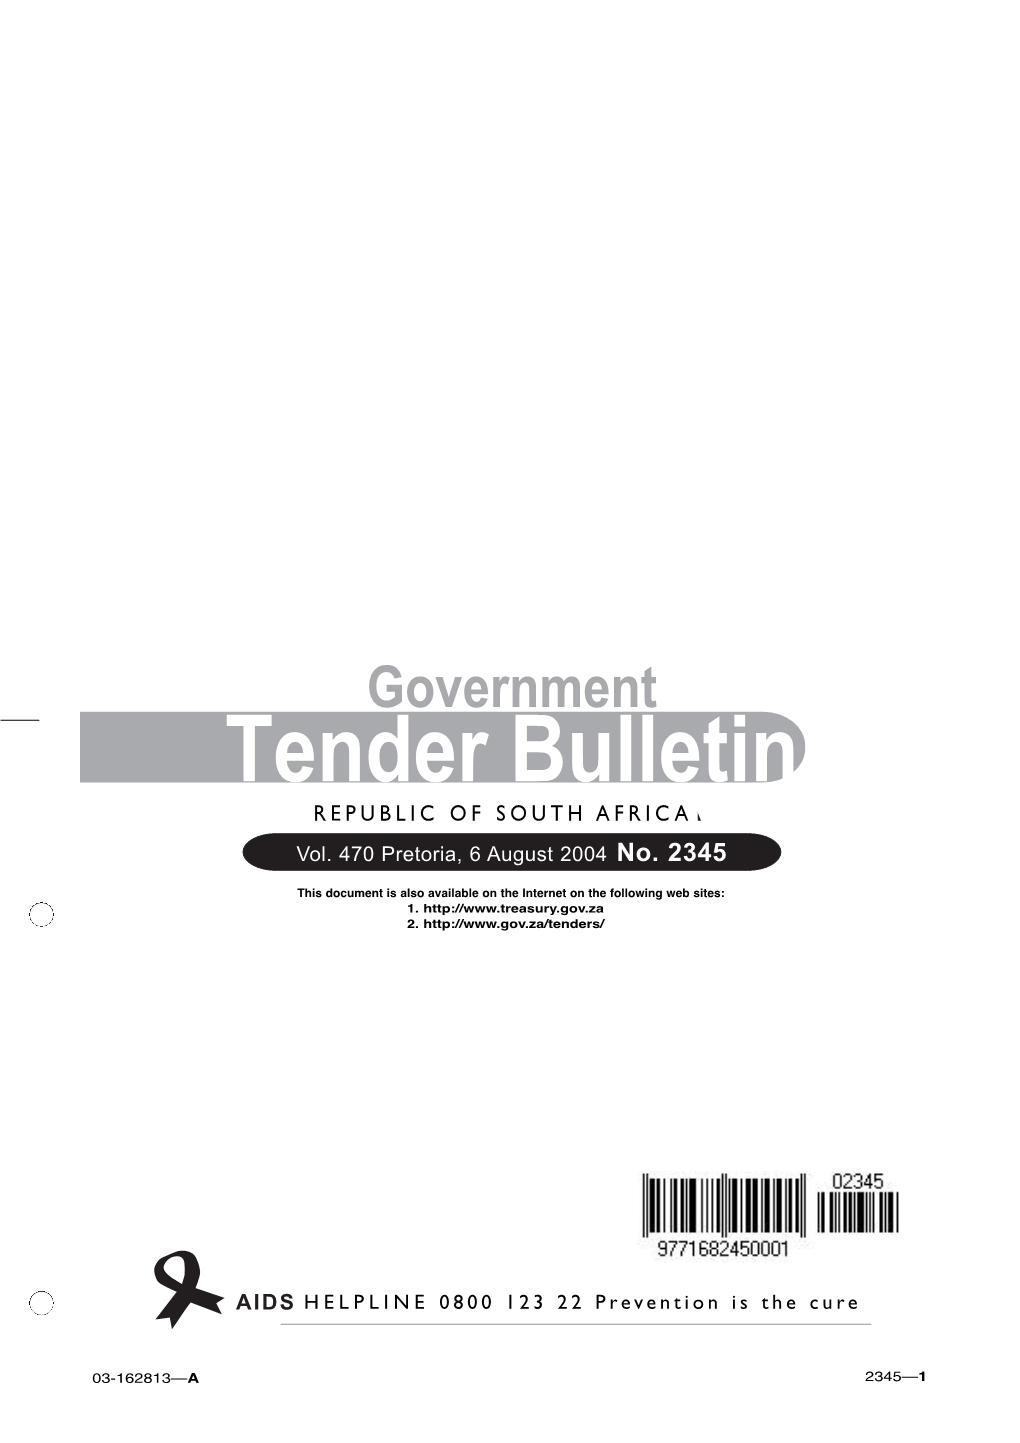 Tender Bulletin REPUBLICREPUBLIC of of SOUTH SOUTH AFRICA AFRICA Vol